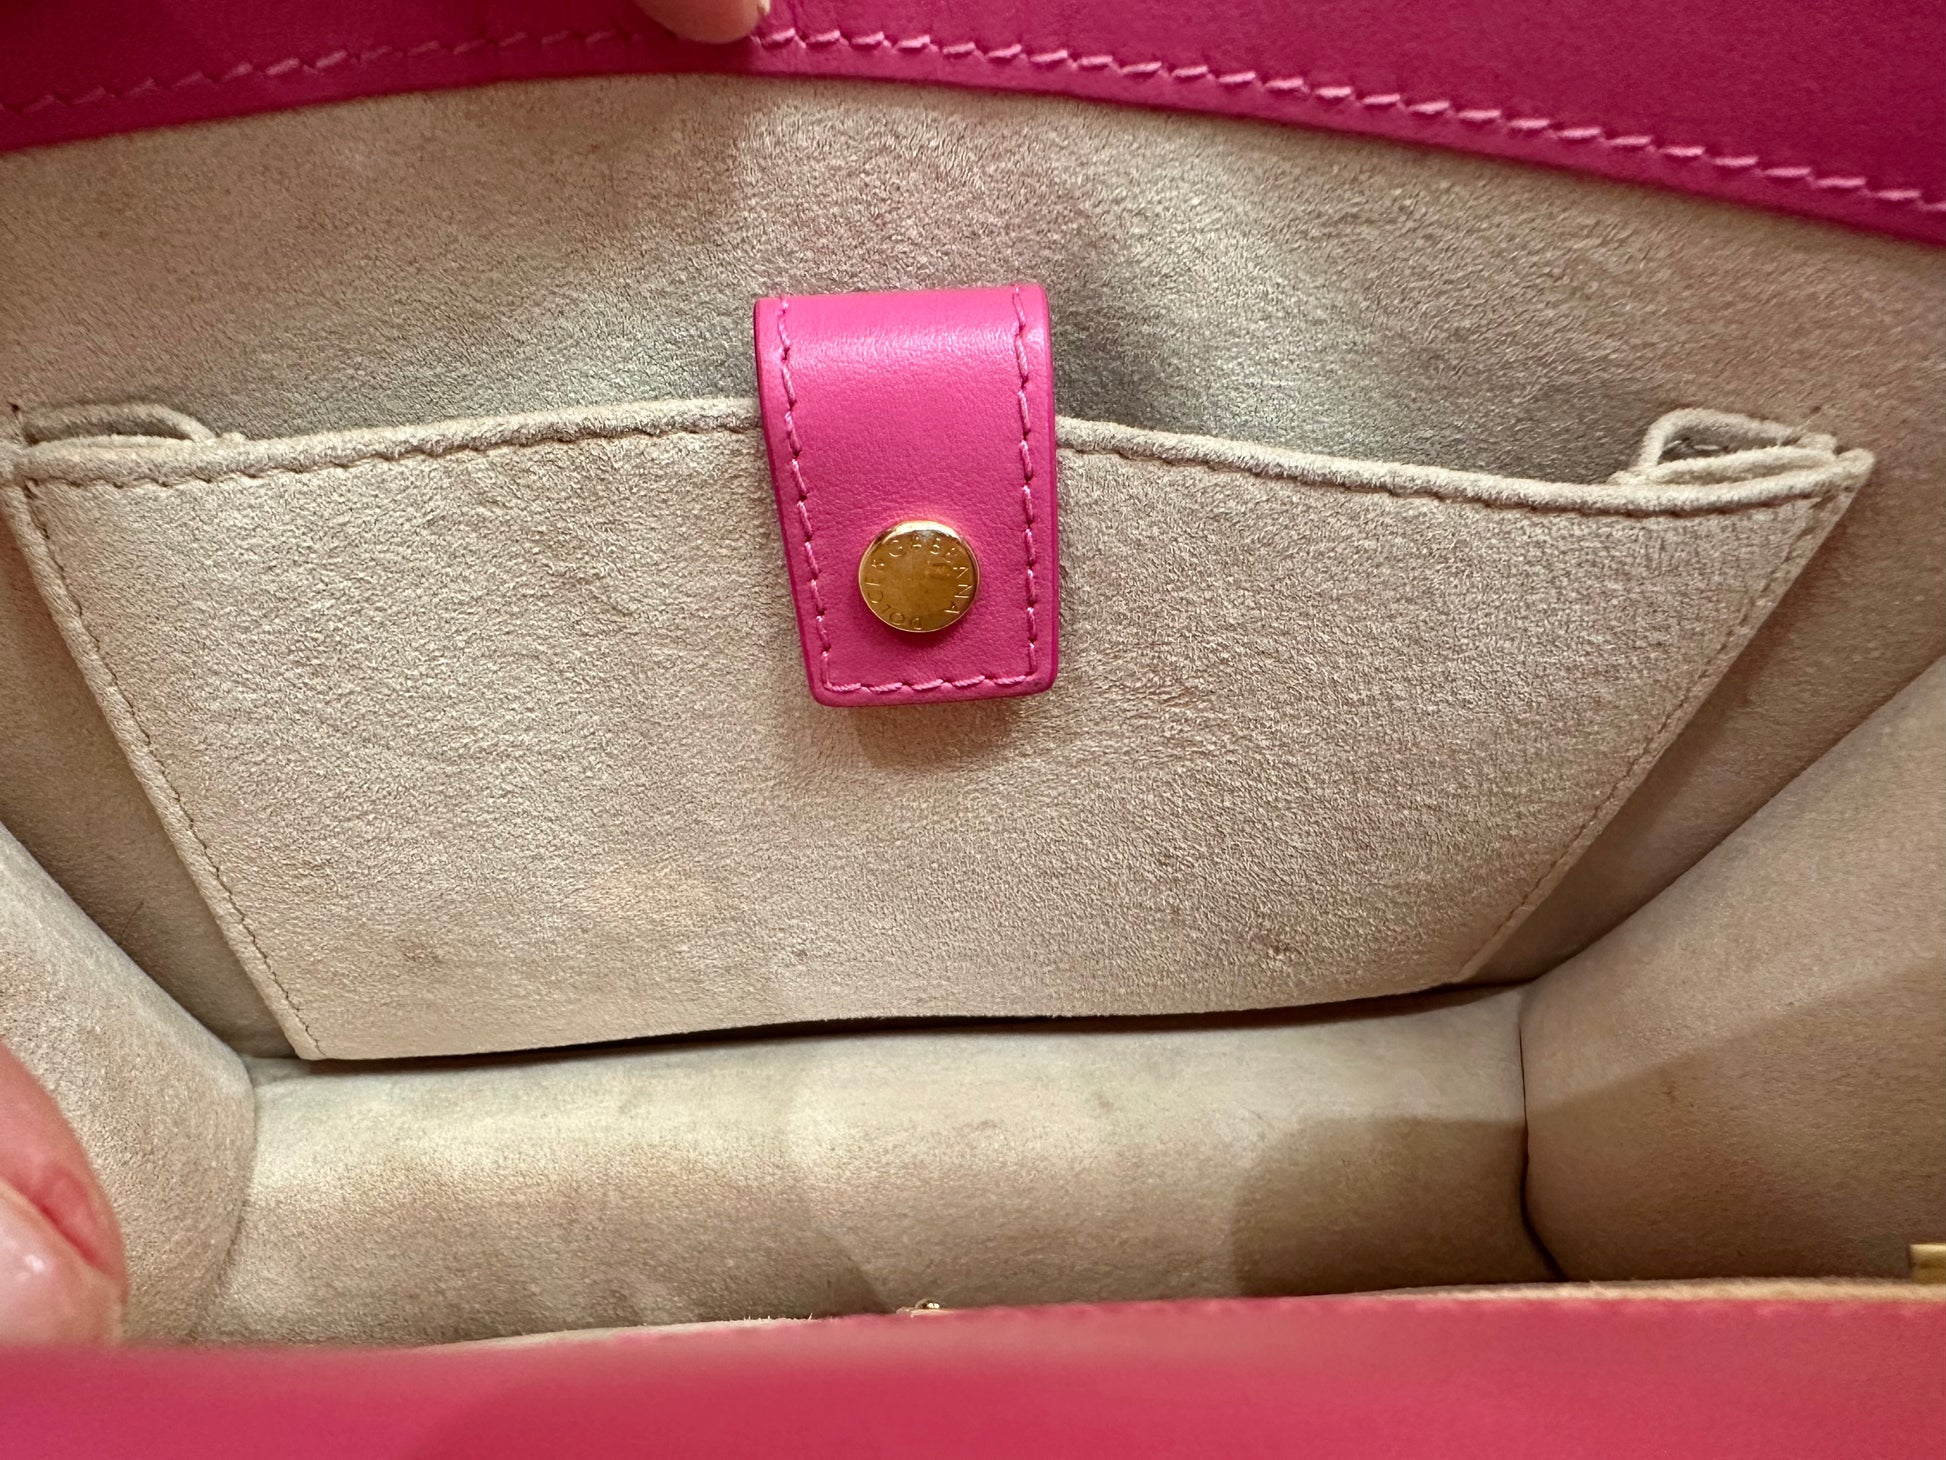 Interior pocket with snap button closure